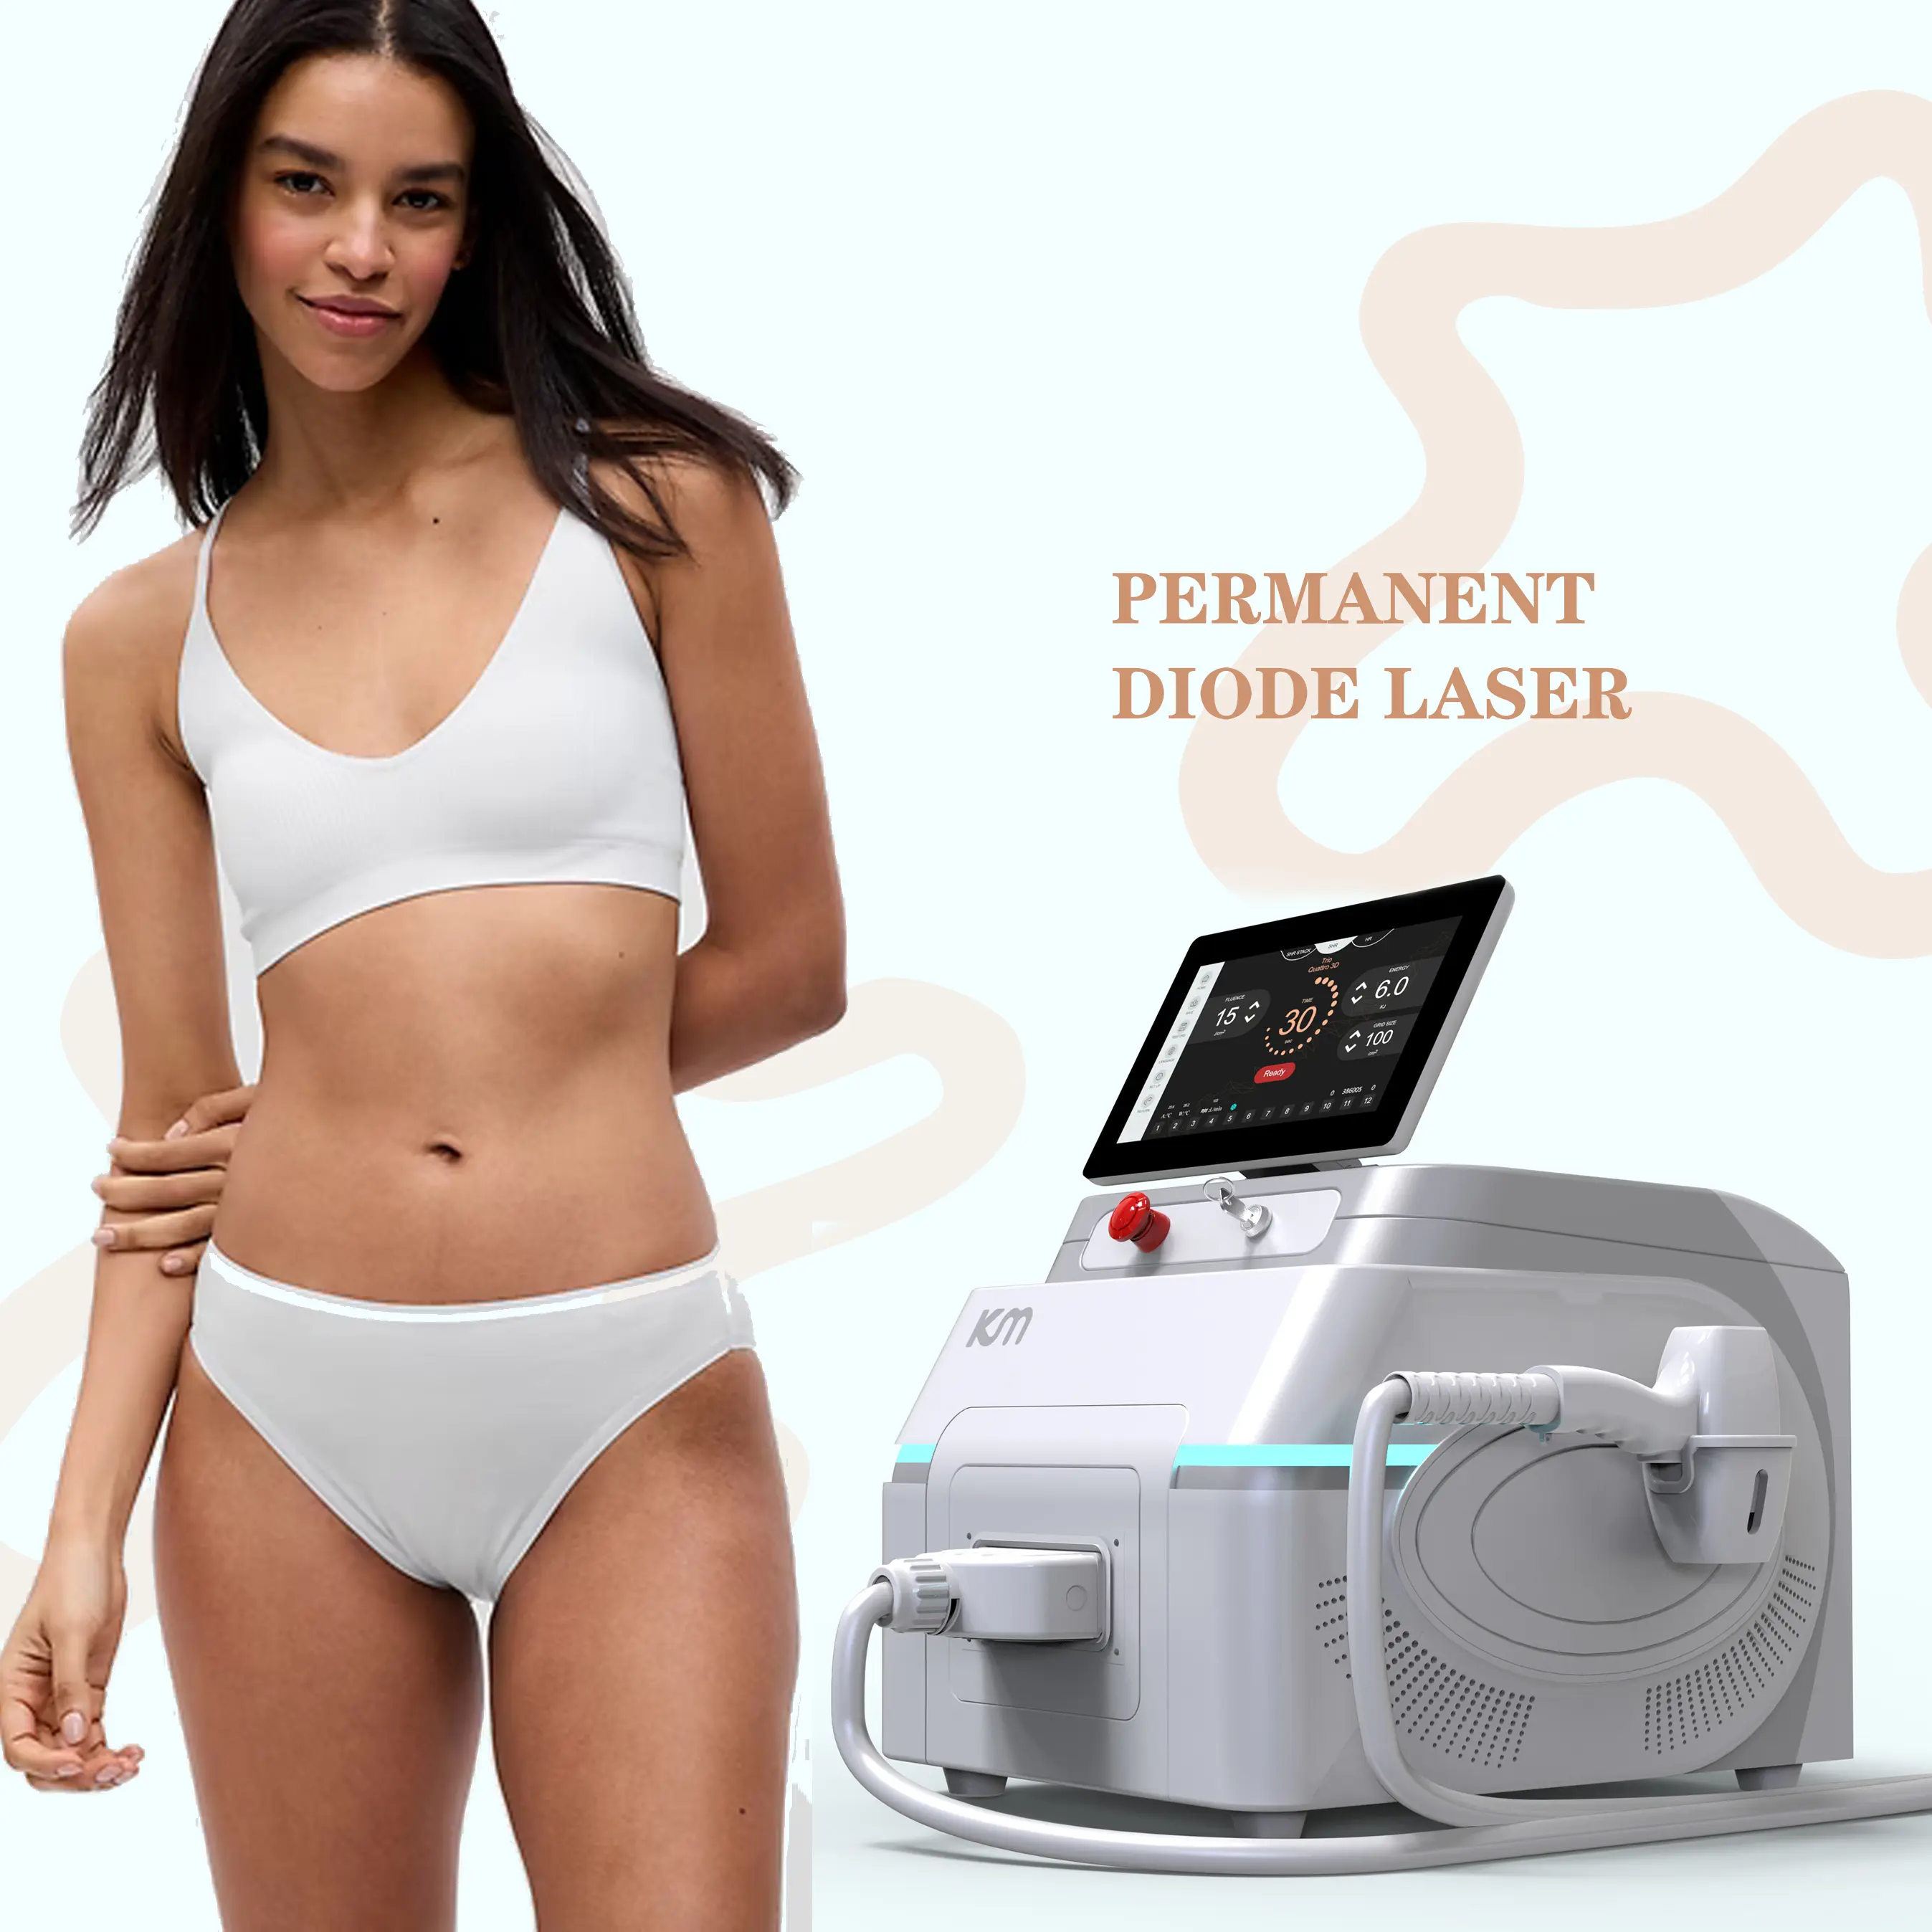 Remote control handle beauty salon equipment ice diode laser hair removal machine 3 wavelength 808nm 755nm 1064nm